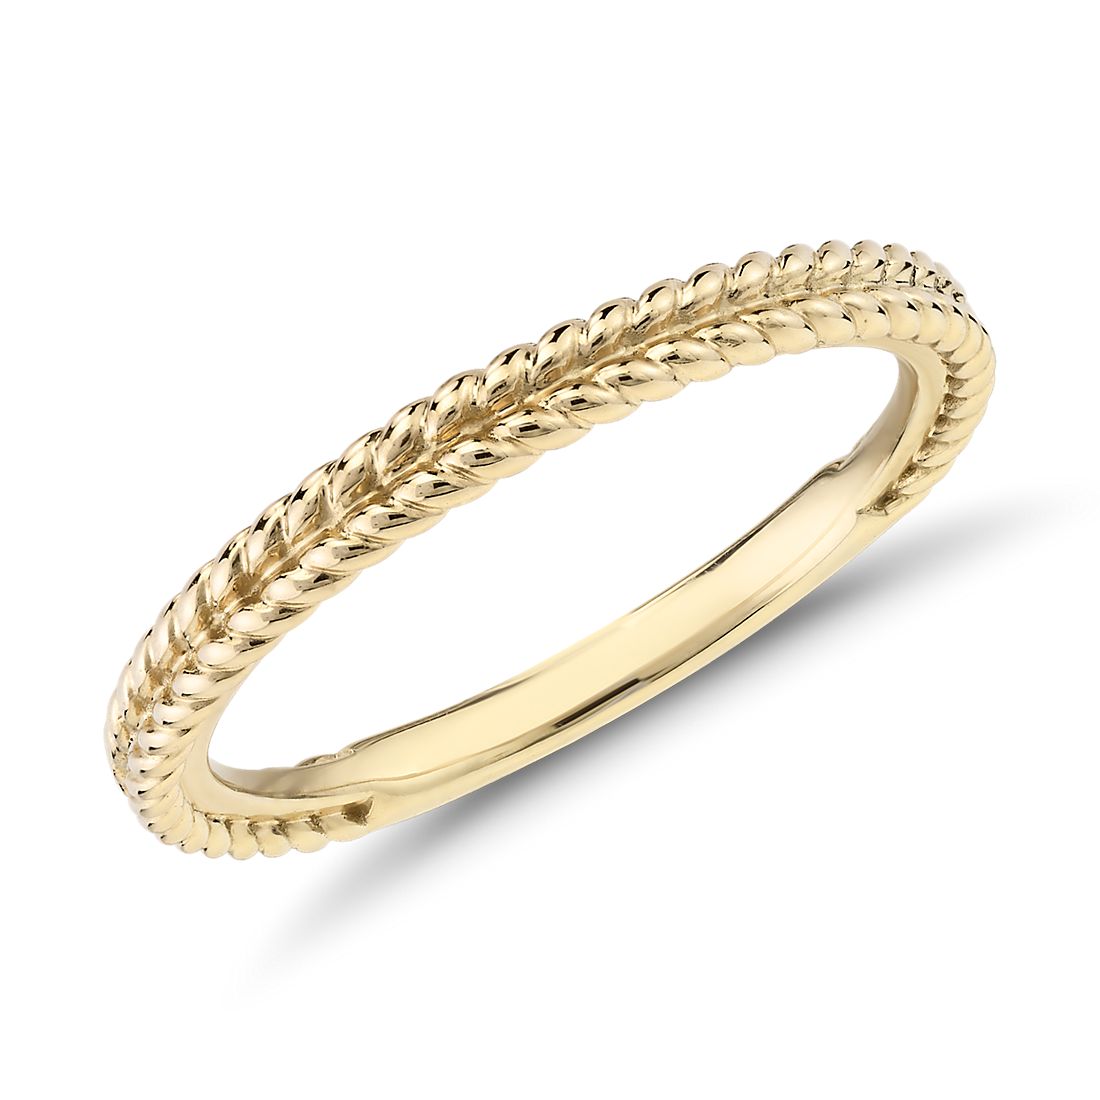 Braided Wedding Band in 14k Yellow Gold Blue Nile